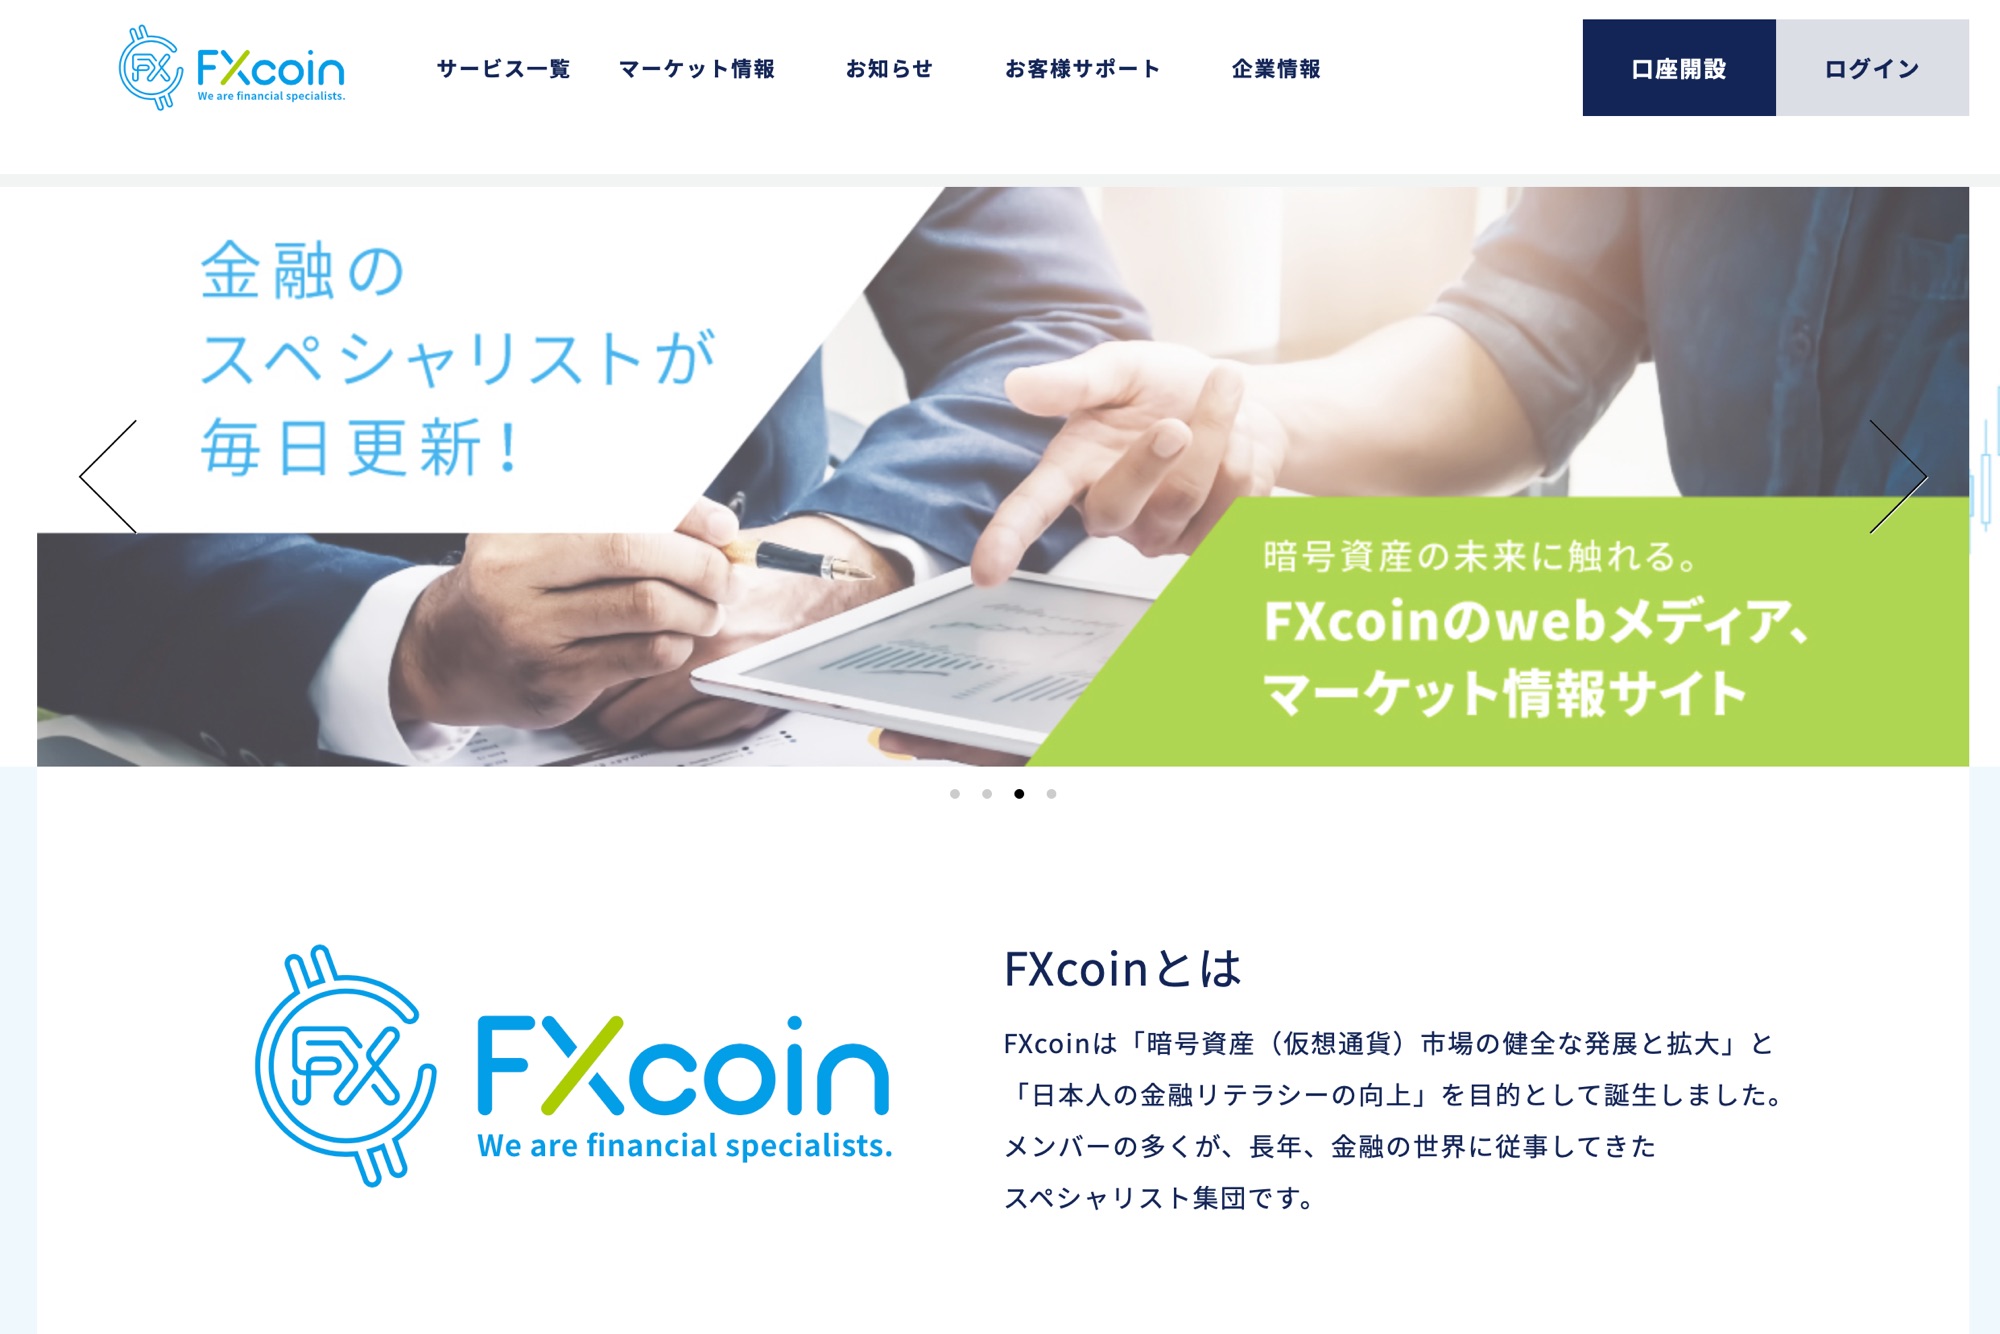 Fxcoinの口コミ 評判 口座開設 仮想通貨 暗号資産 の比較 ランキングならhedge Guide